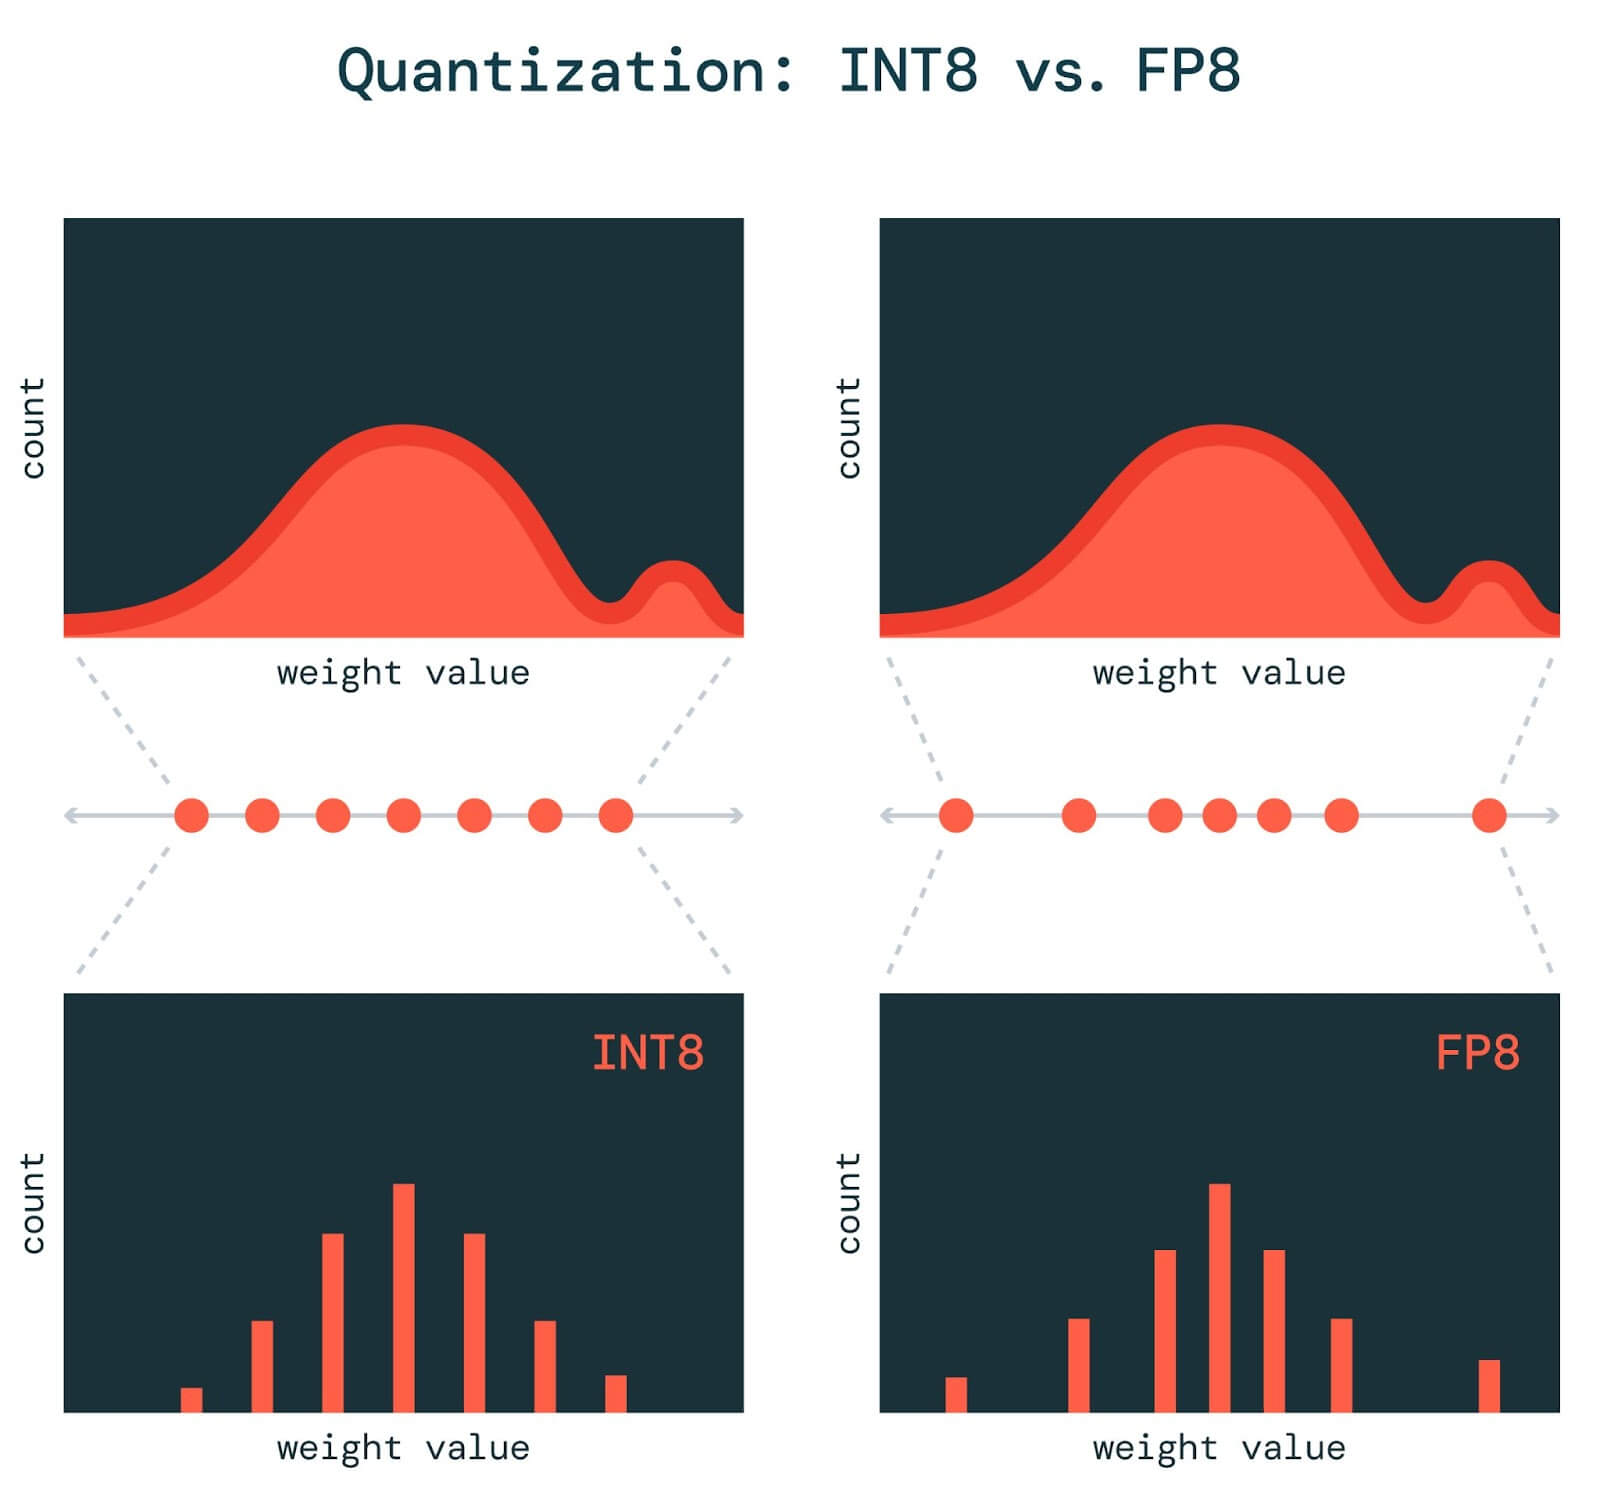 Compared to integer quantization, FP8 quantization produces smaller errors for weights near the middle of our distribution.